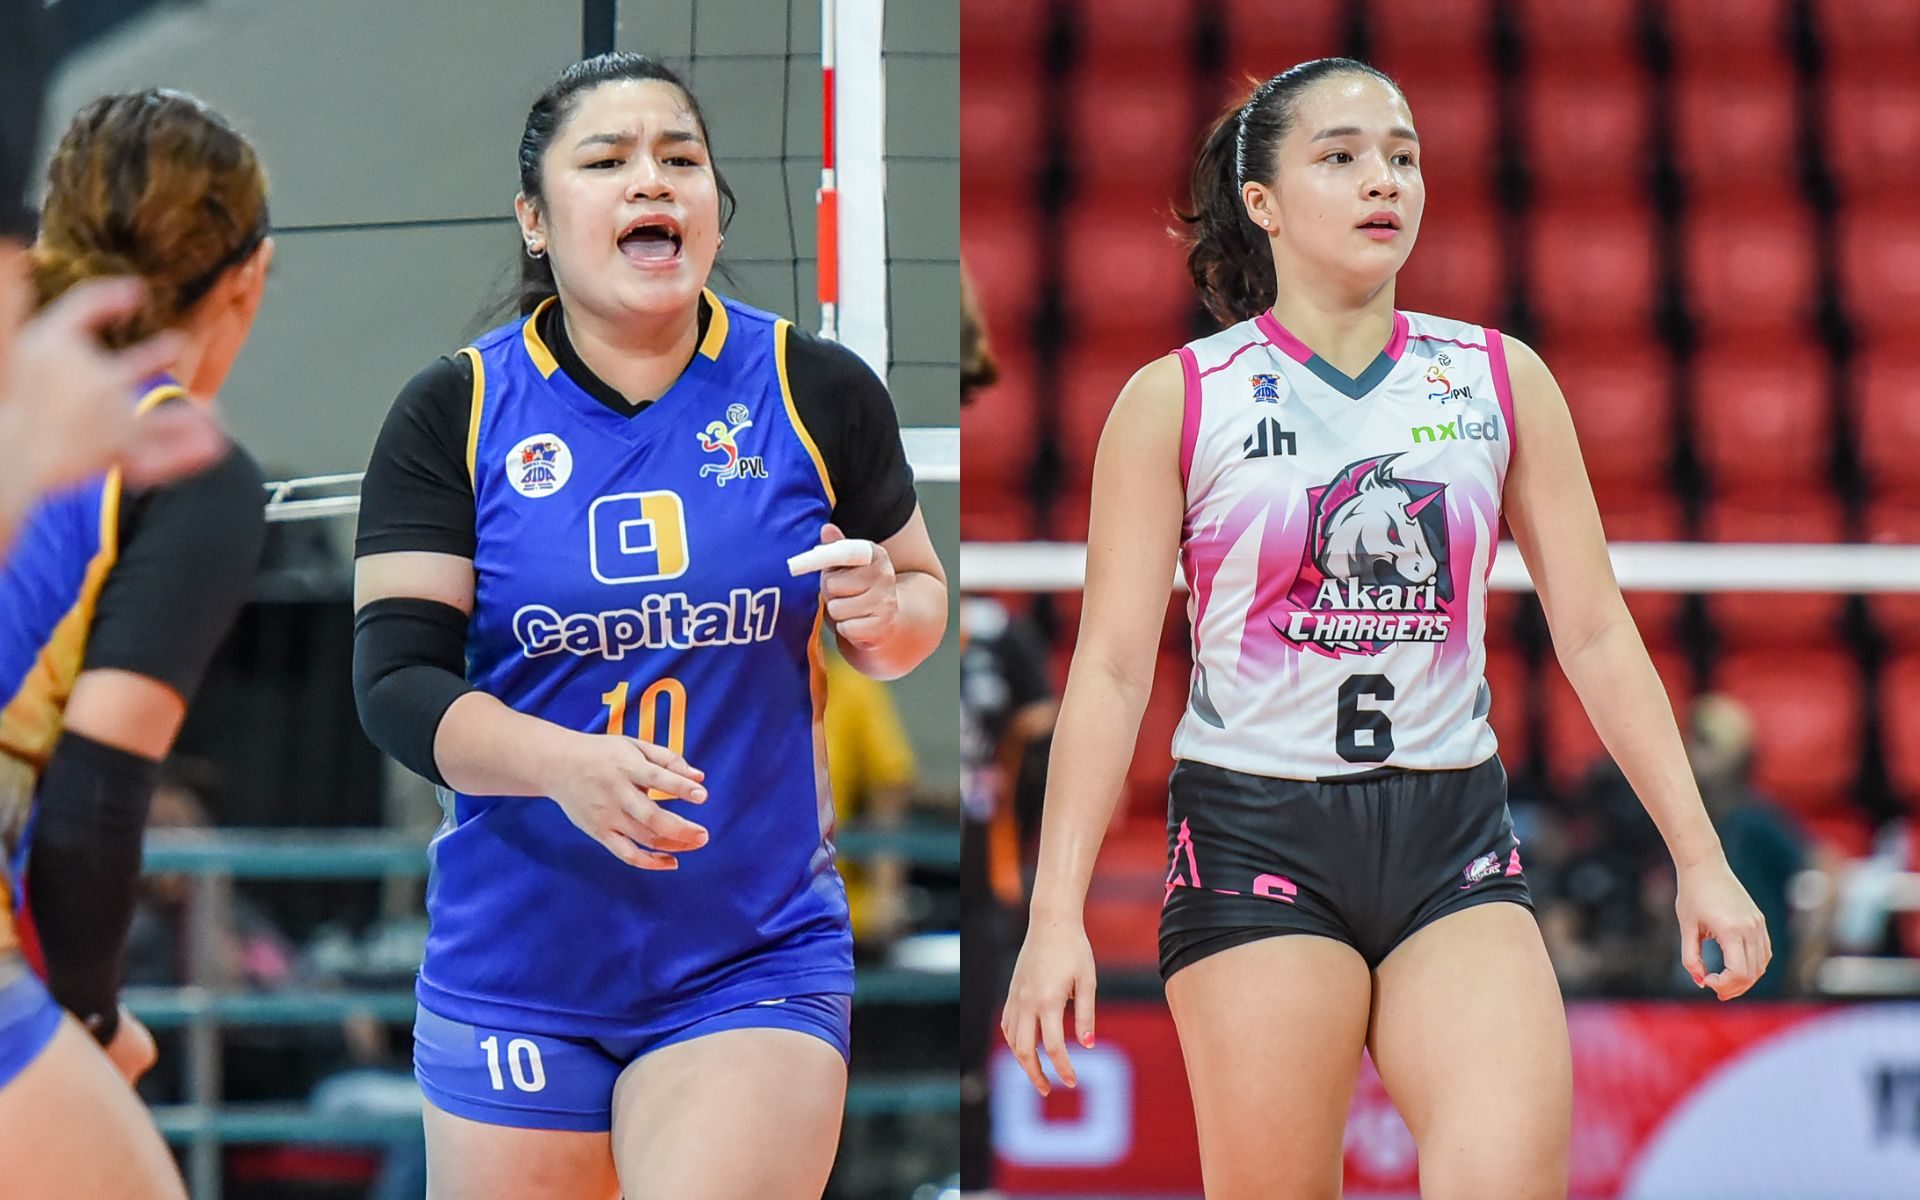 Shining bright: Capital1 earns first-ever PVL win; Akari nabs breakthrough after bad start